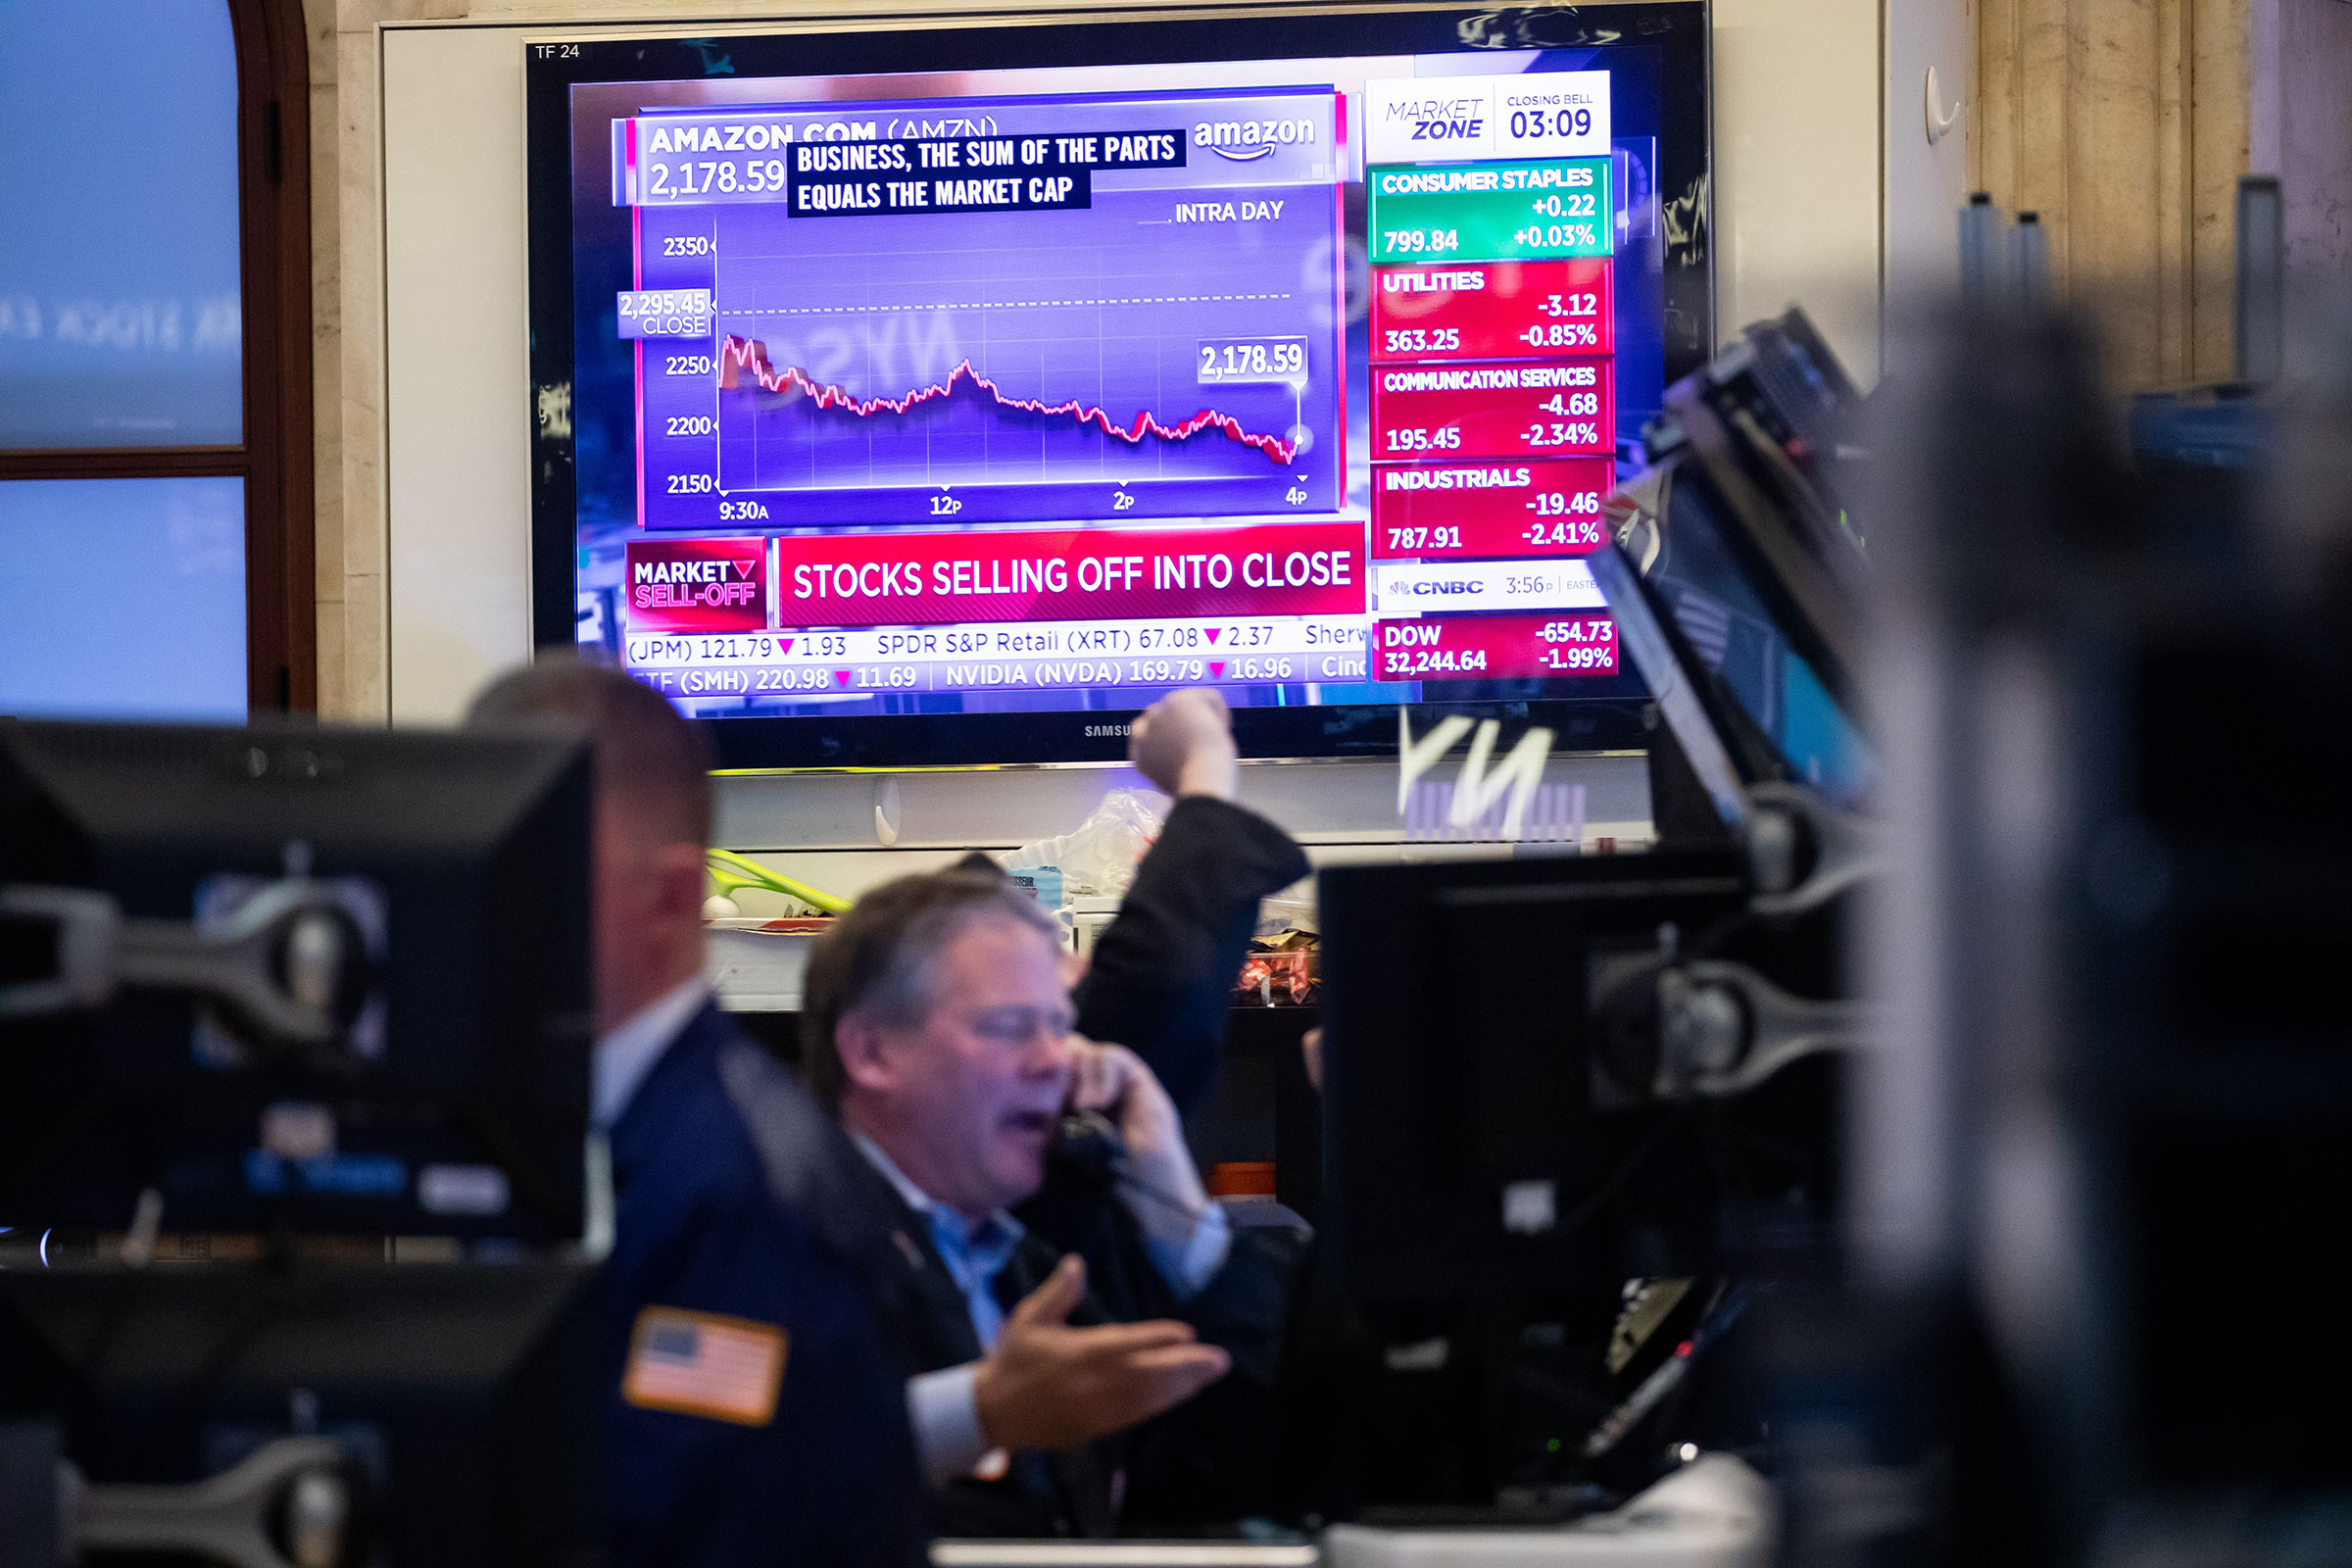 Traders work at the New York Stock Exchange in New York City, on May 9, 2022. (Michael Nagle—Xinhua/Getty Images)